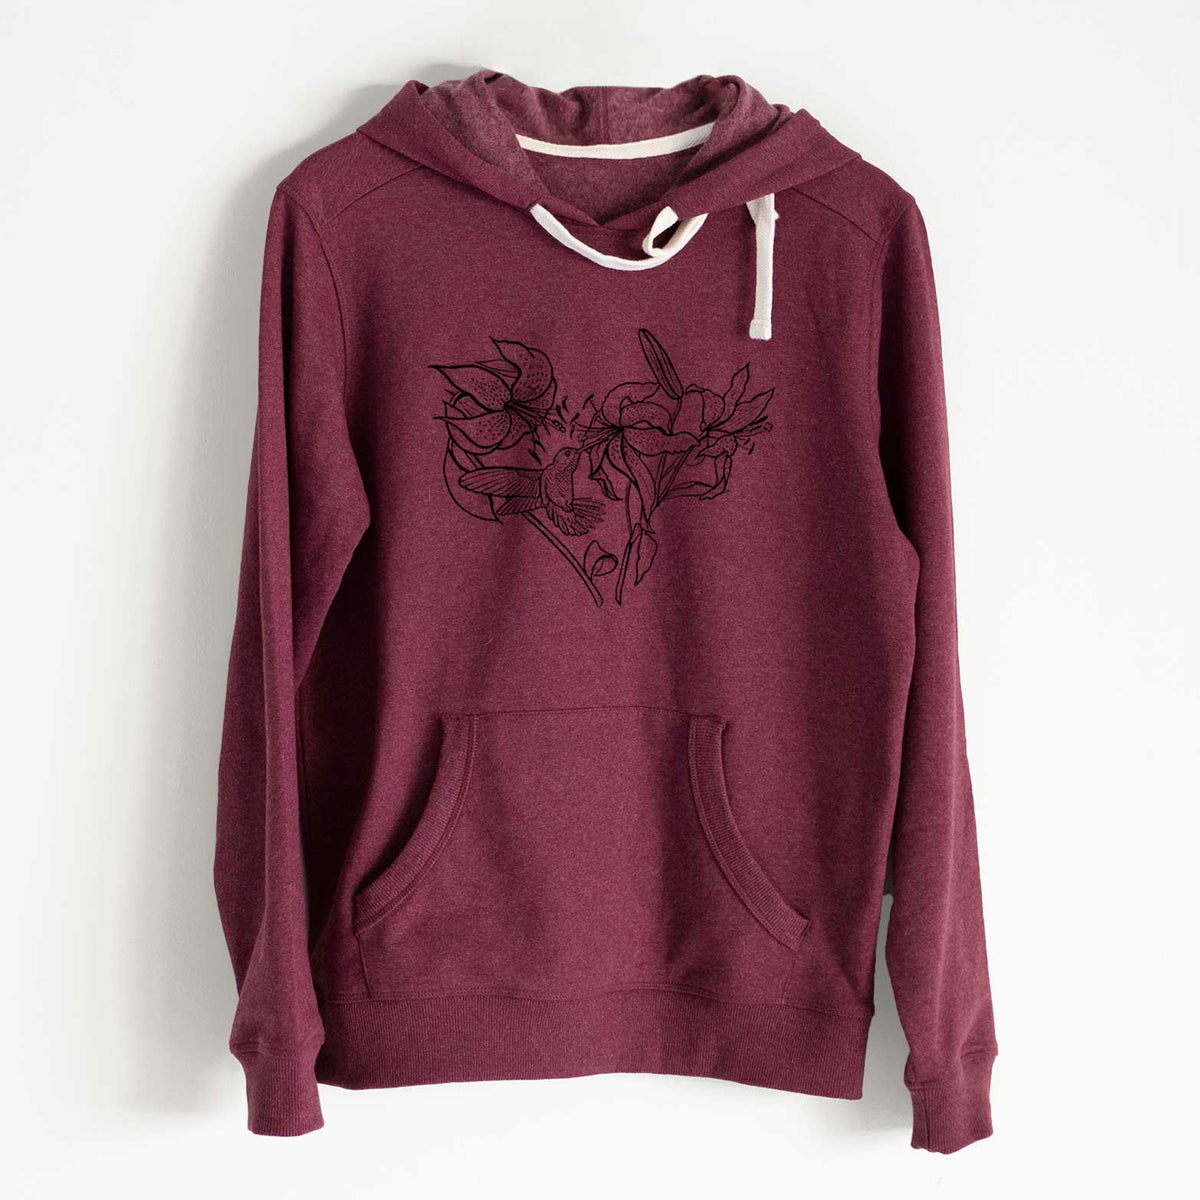 Hummingbird with Lillies Heart - Unisex Recycled Hoodie - CLOSEOUT - FINAL SALE